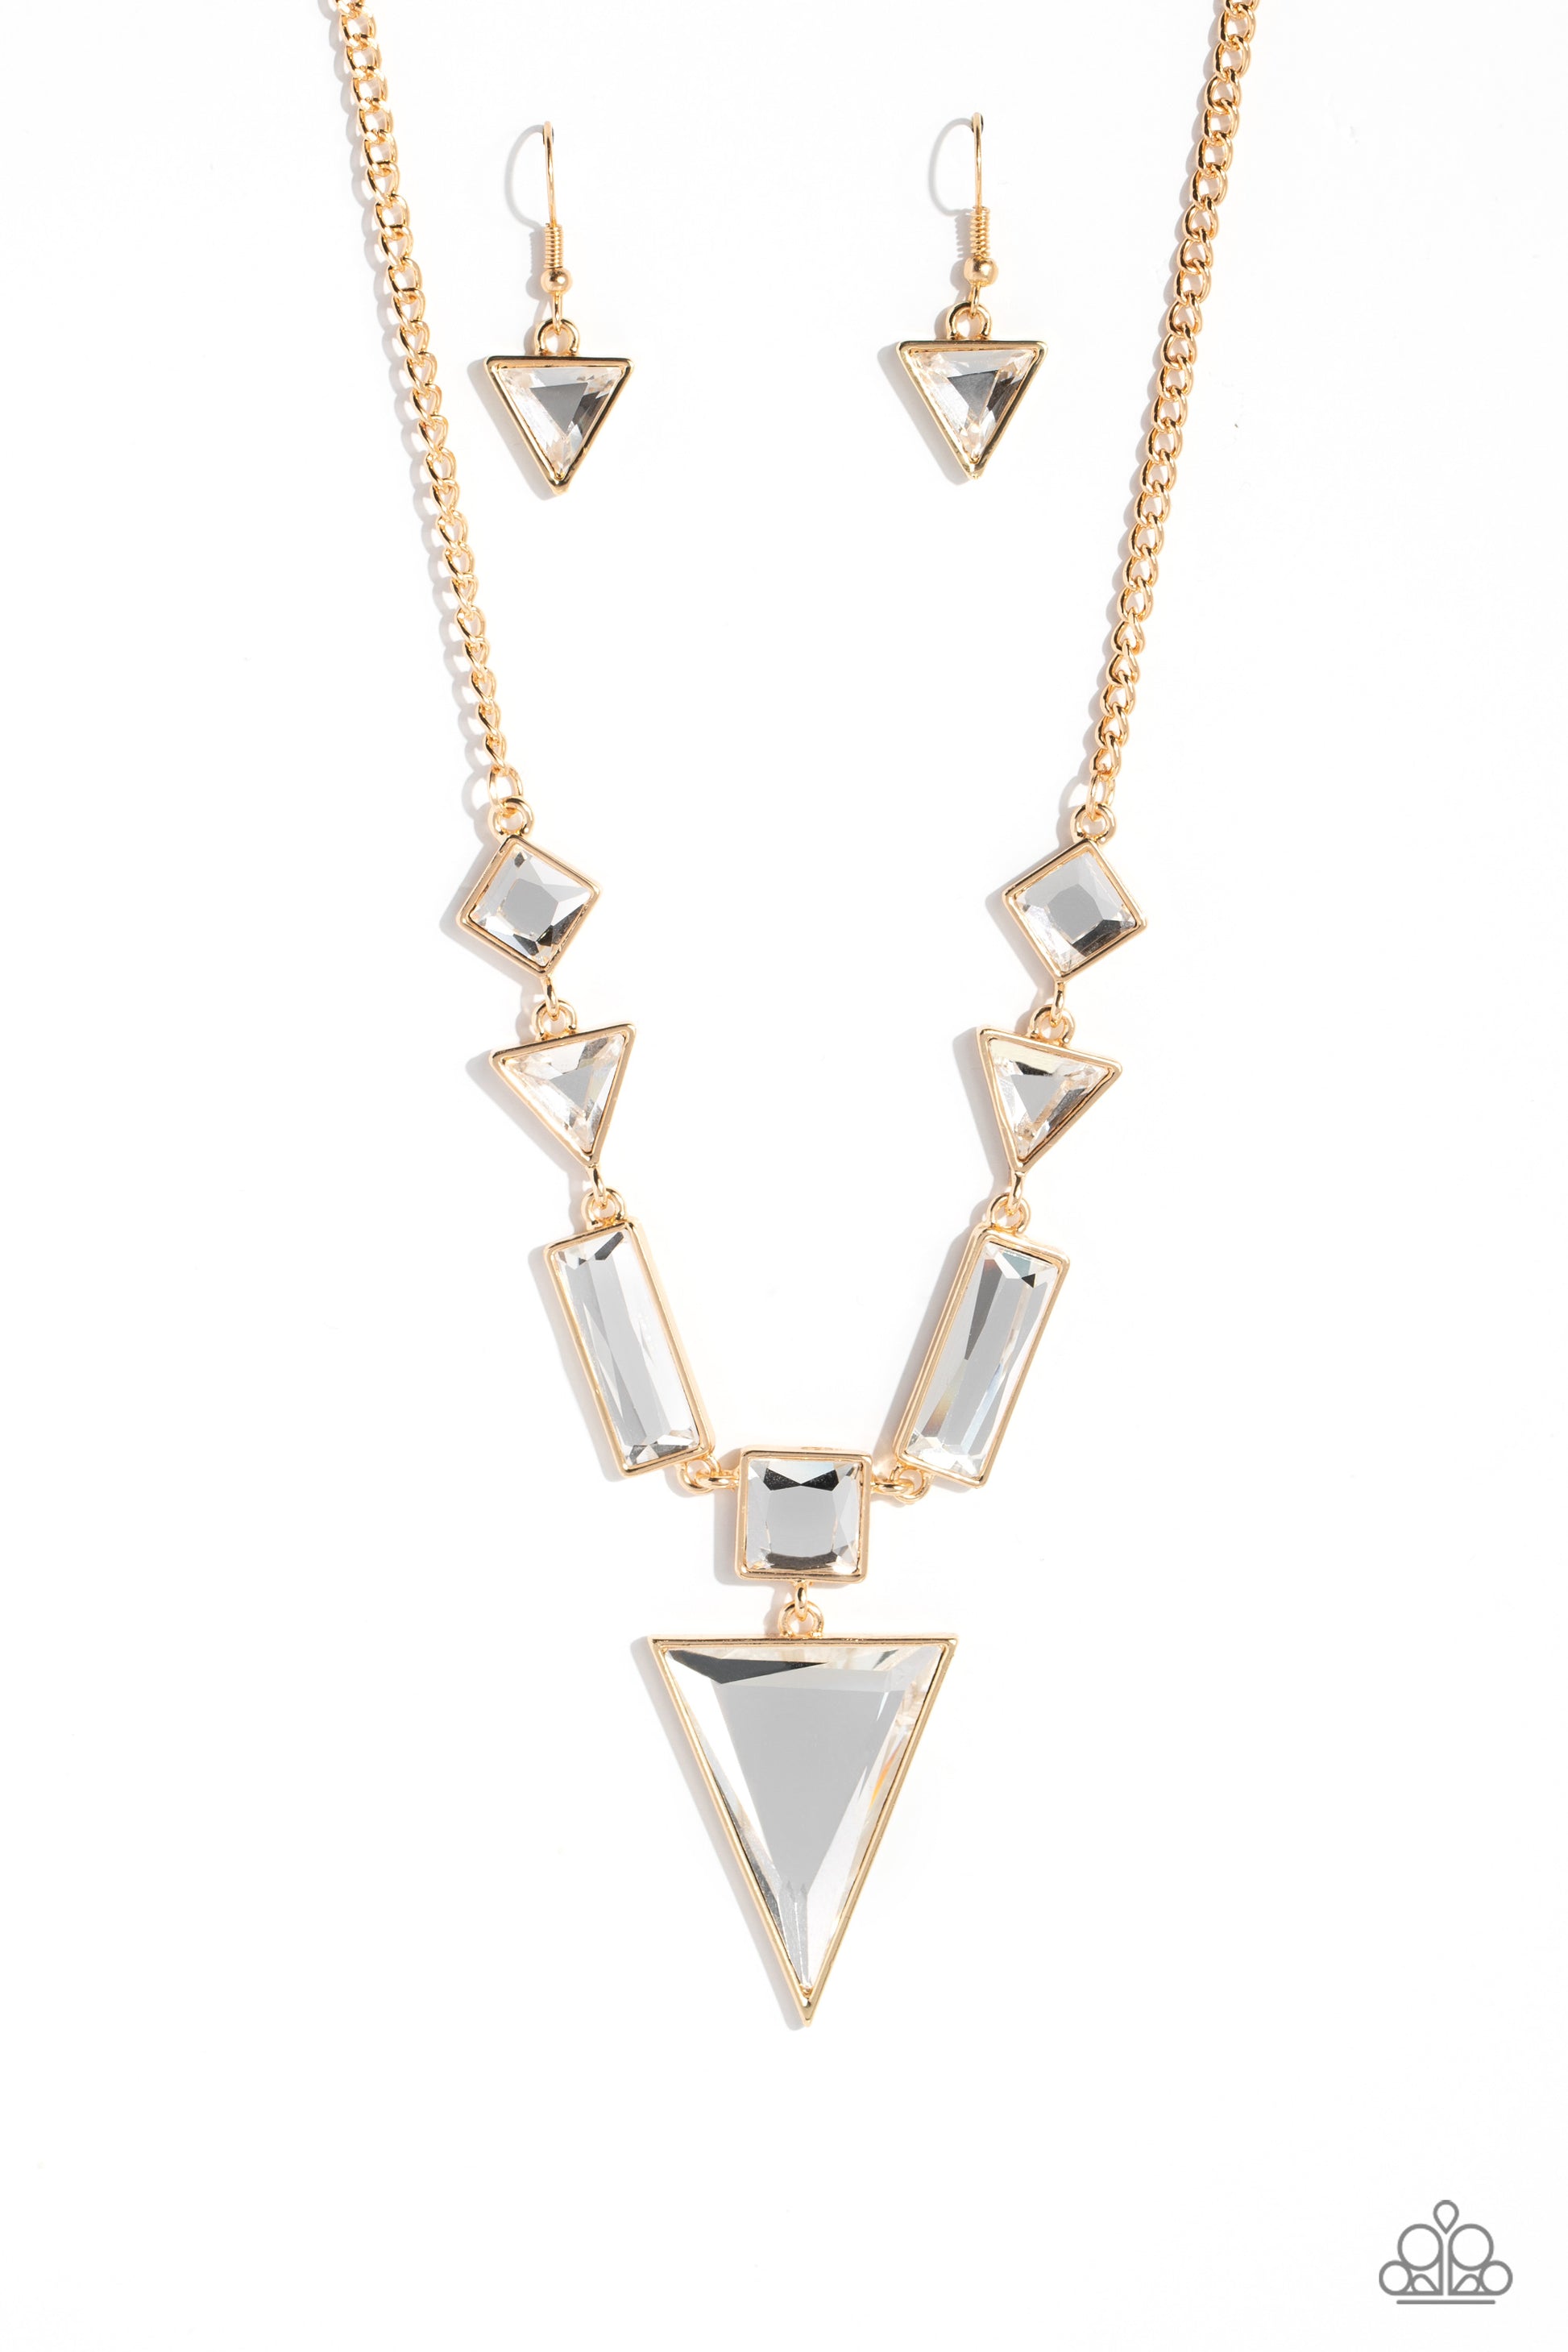 An array of glassy white gems are chiseled into geometric shapes and pressed into shimmery gold frames. The angular display falls to a dramatic point at the center, where a square-cut gem anchors an upside-down triangular pendant for a flawless finish. Features an adjustable clasp closure.  Sold as one individual necklace. Includes one pair of matching earrings.